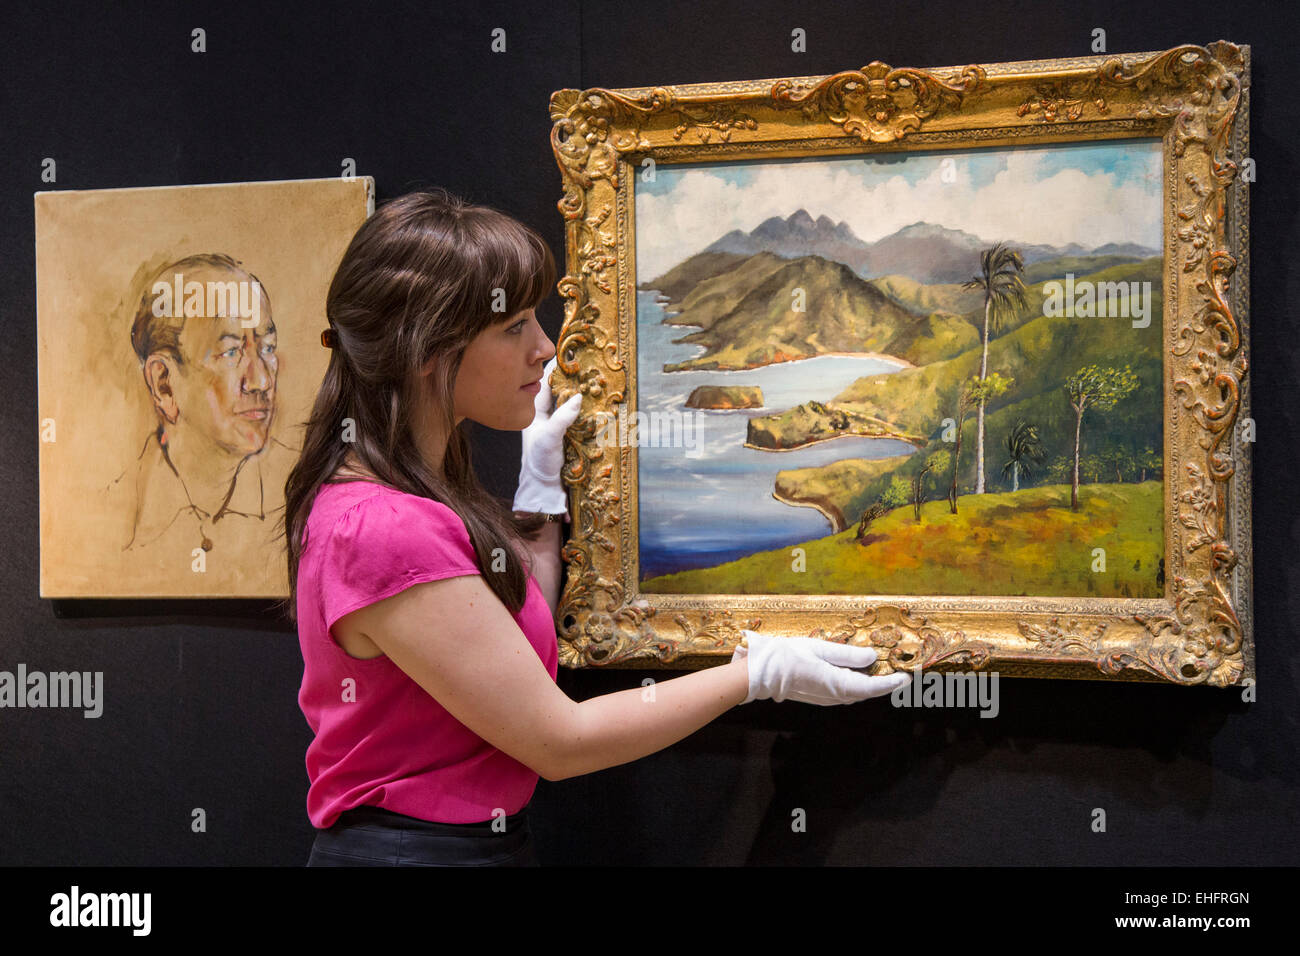 London, UK. 13 March 2015. A Christie's employee holds up the oil painting "A View from Firefly" by Sir Noël Coward, estimate: GBP 10,000-15,000. Christie's announces the sale of a selection of artworks formerly in the private collection of Sir Noël Coward, which will be offered as part of the Modern British and Irish Art sale on 19 March 2015 at South Kensington. The collection features paintings by Coward himself and paintings he acquired and those that were gifted to him by famous friends. Photo: Bettina Strenske Stock Photo